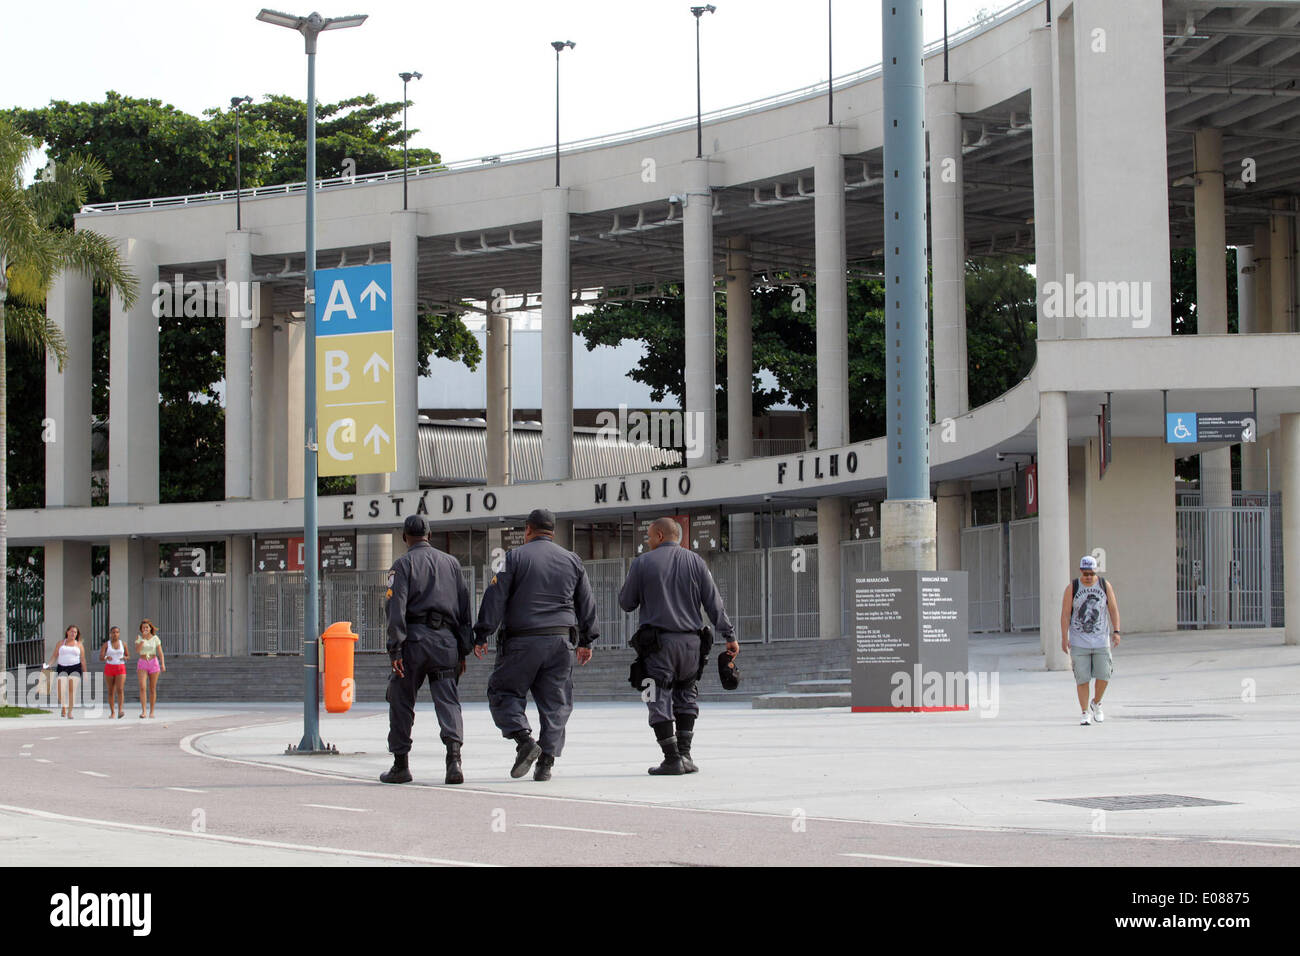 Rio De Janeiro, Brazil. 5th May, 2014. Policemen guard in front of the Maracana Stadium in Rio de Janeiro, Brazil, on May 5, 2014. Luiz Fernando Pezao, governor of the state of Rio de Janerio, announced the deployment of 2,000 members of the Military Police that will join other security forces to ensure safety in Rio de Janeiro, prior to the FIFA World Cup Brazil 2014, according to the local press. © AGENCIA ESTADO/Xinhua/Alamy Live News Stock Photo